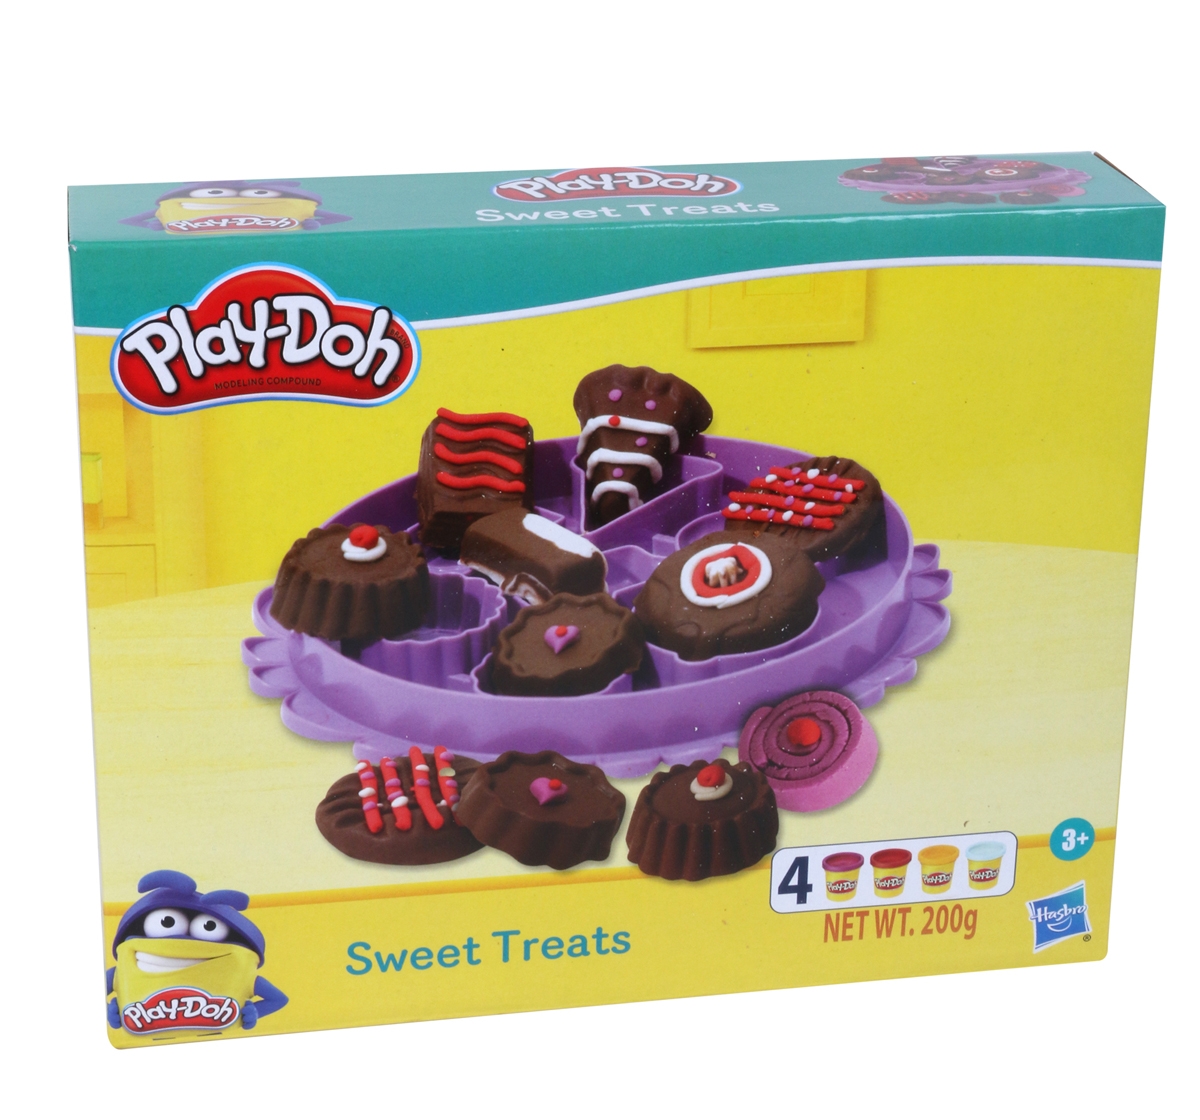 Play-Doh | Play Doh Sweet Treats Playset for Kids 3Y+, Multicolour 3